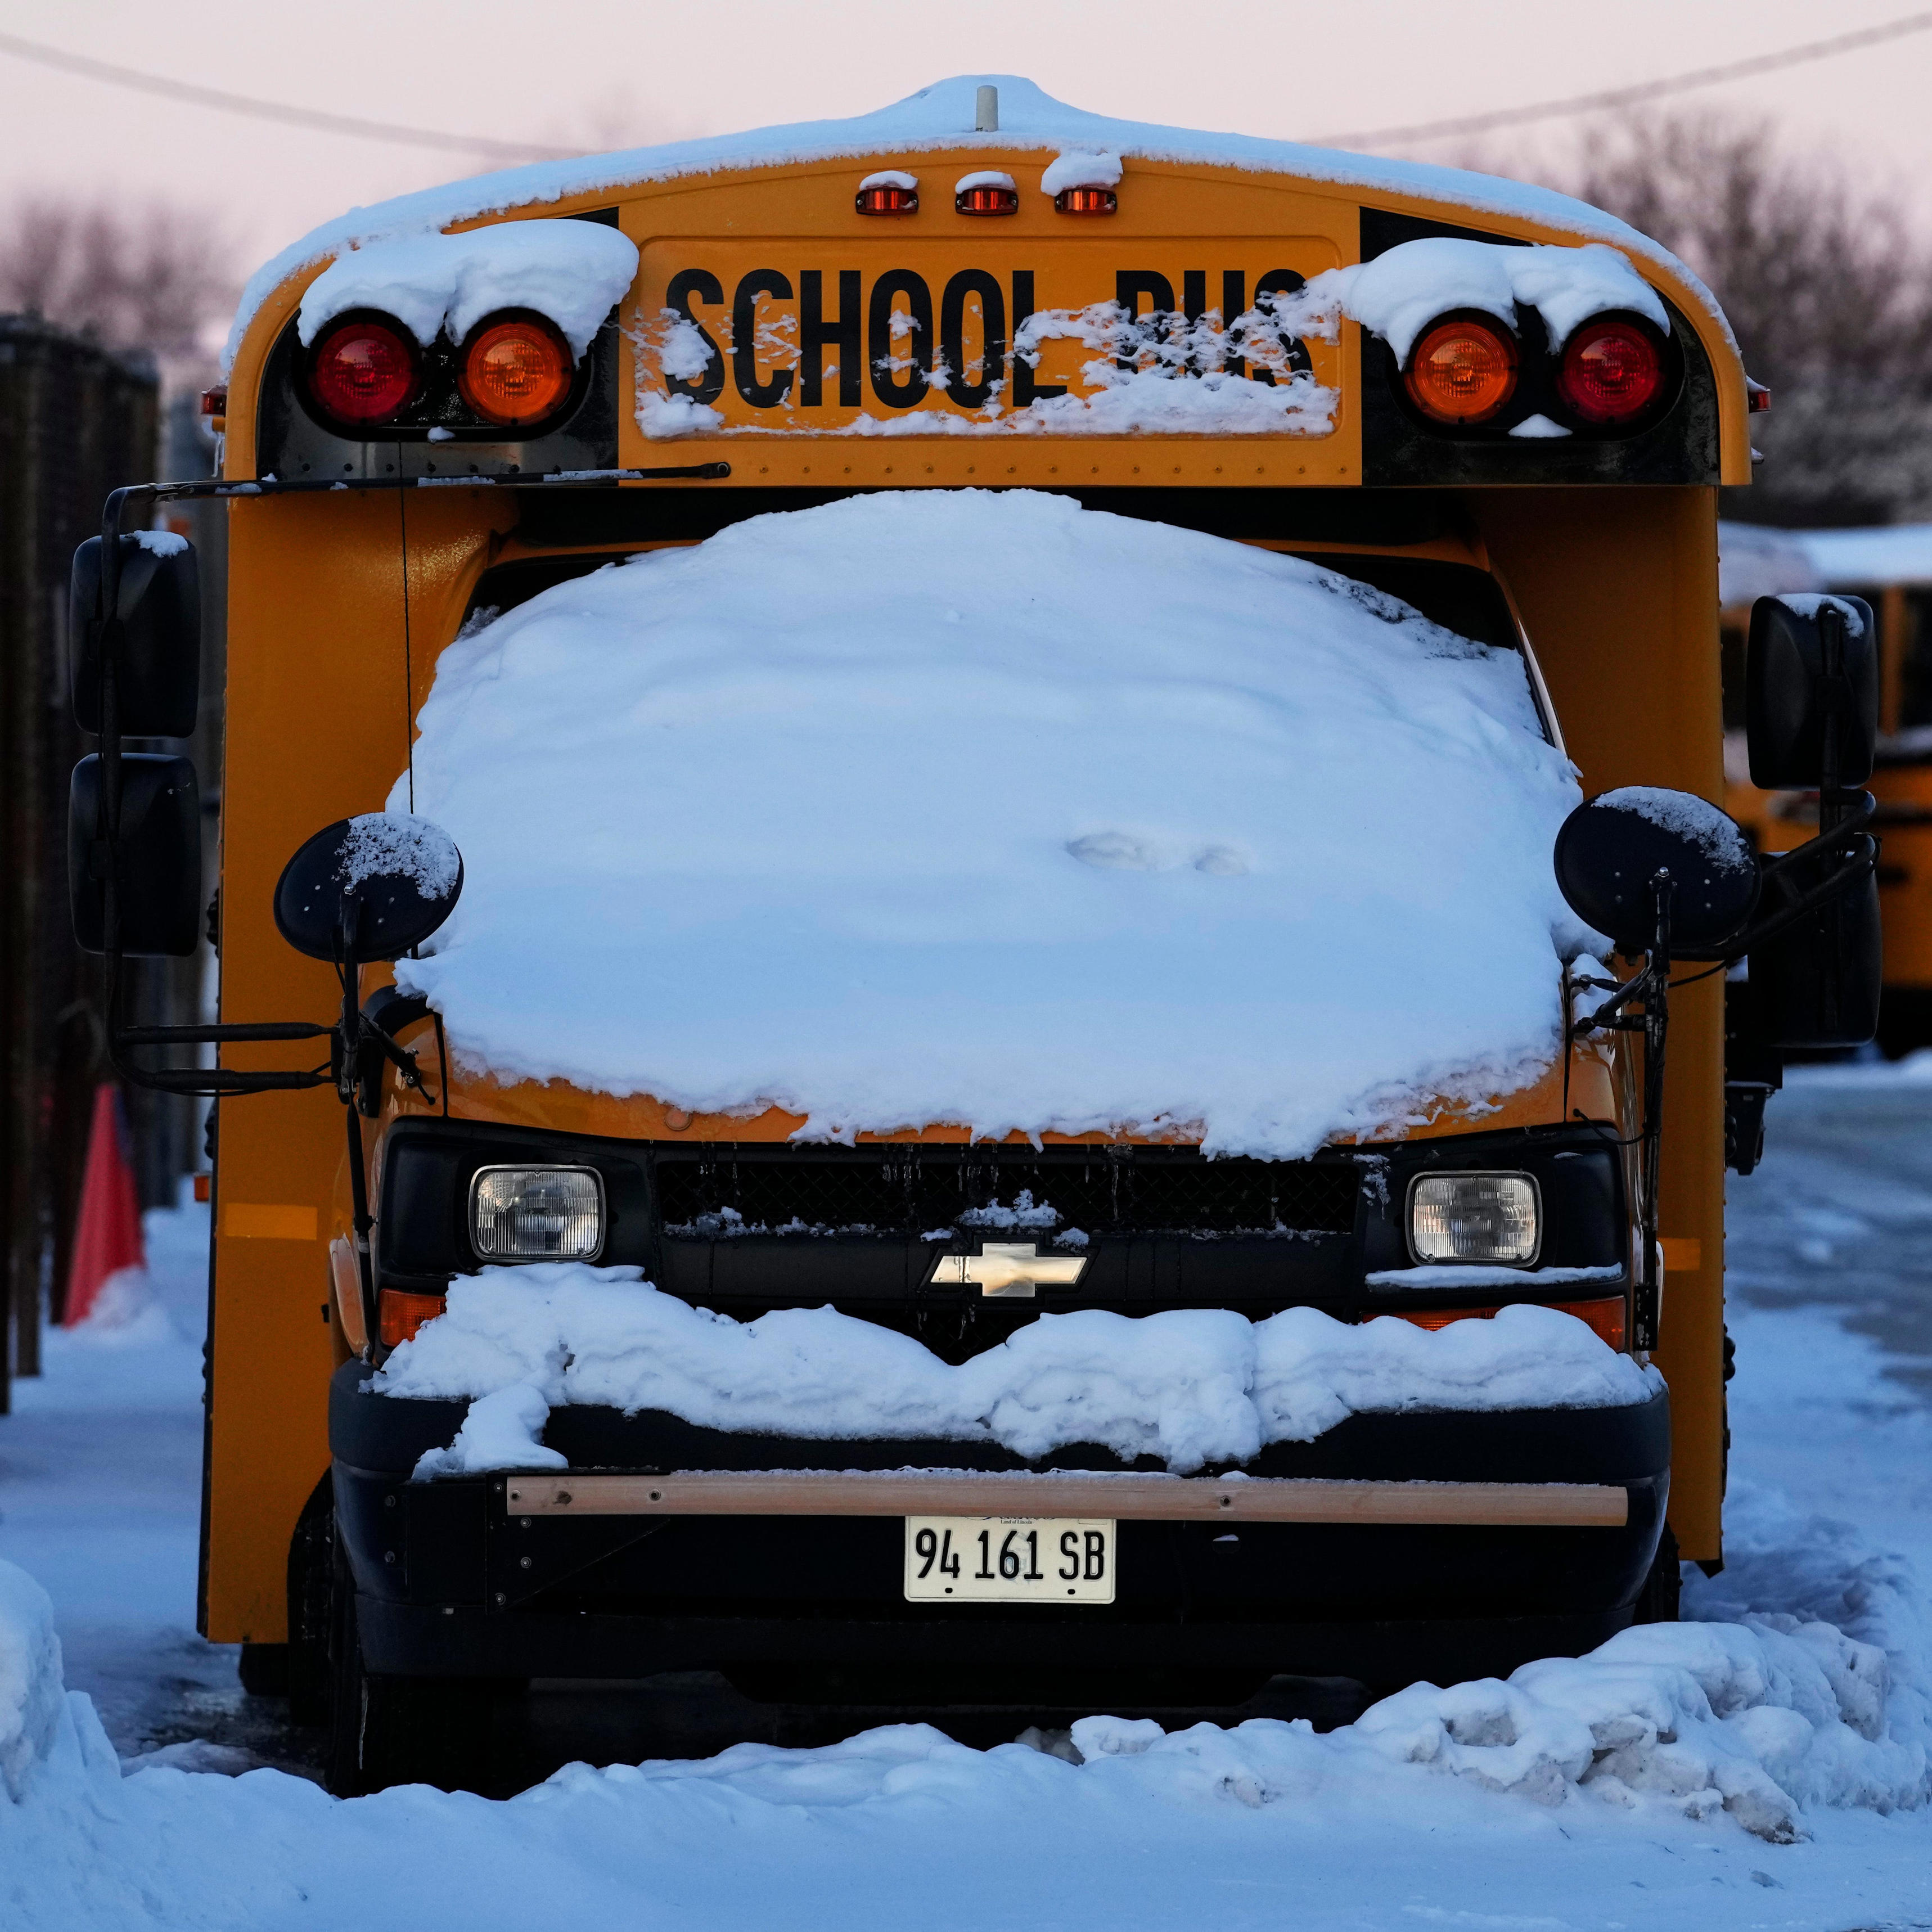 Schools closing in New Jersey, but what does it take to close in